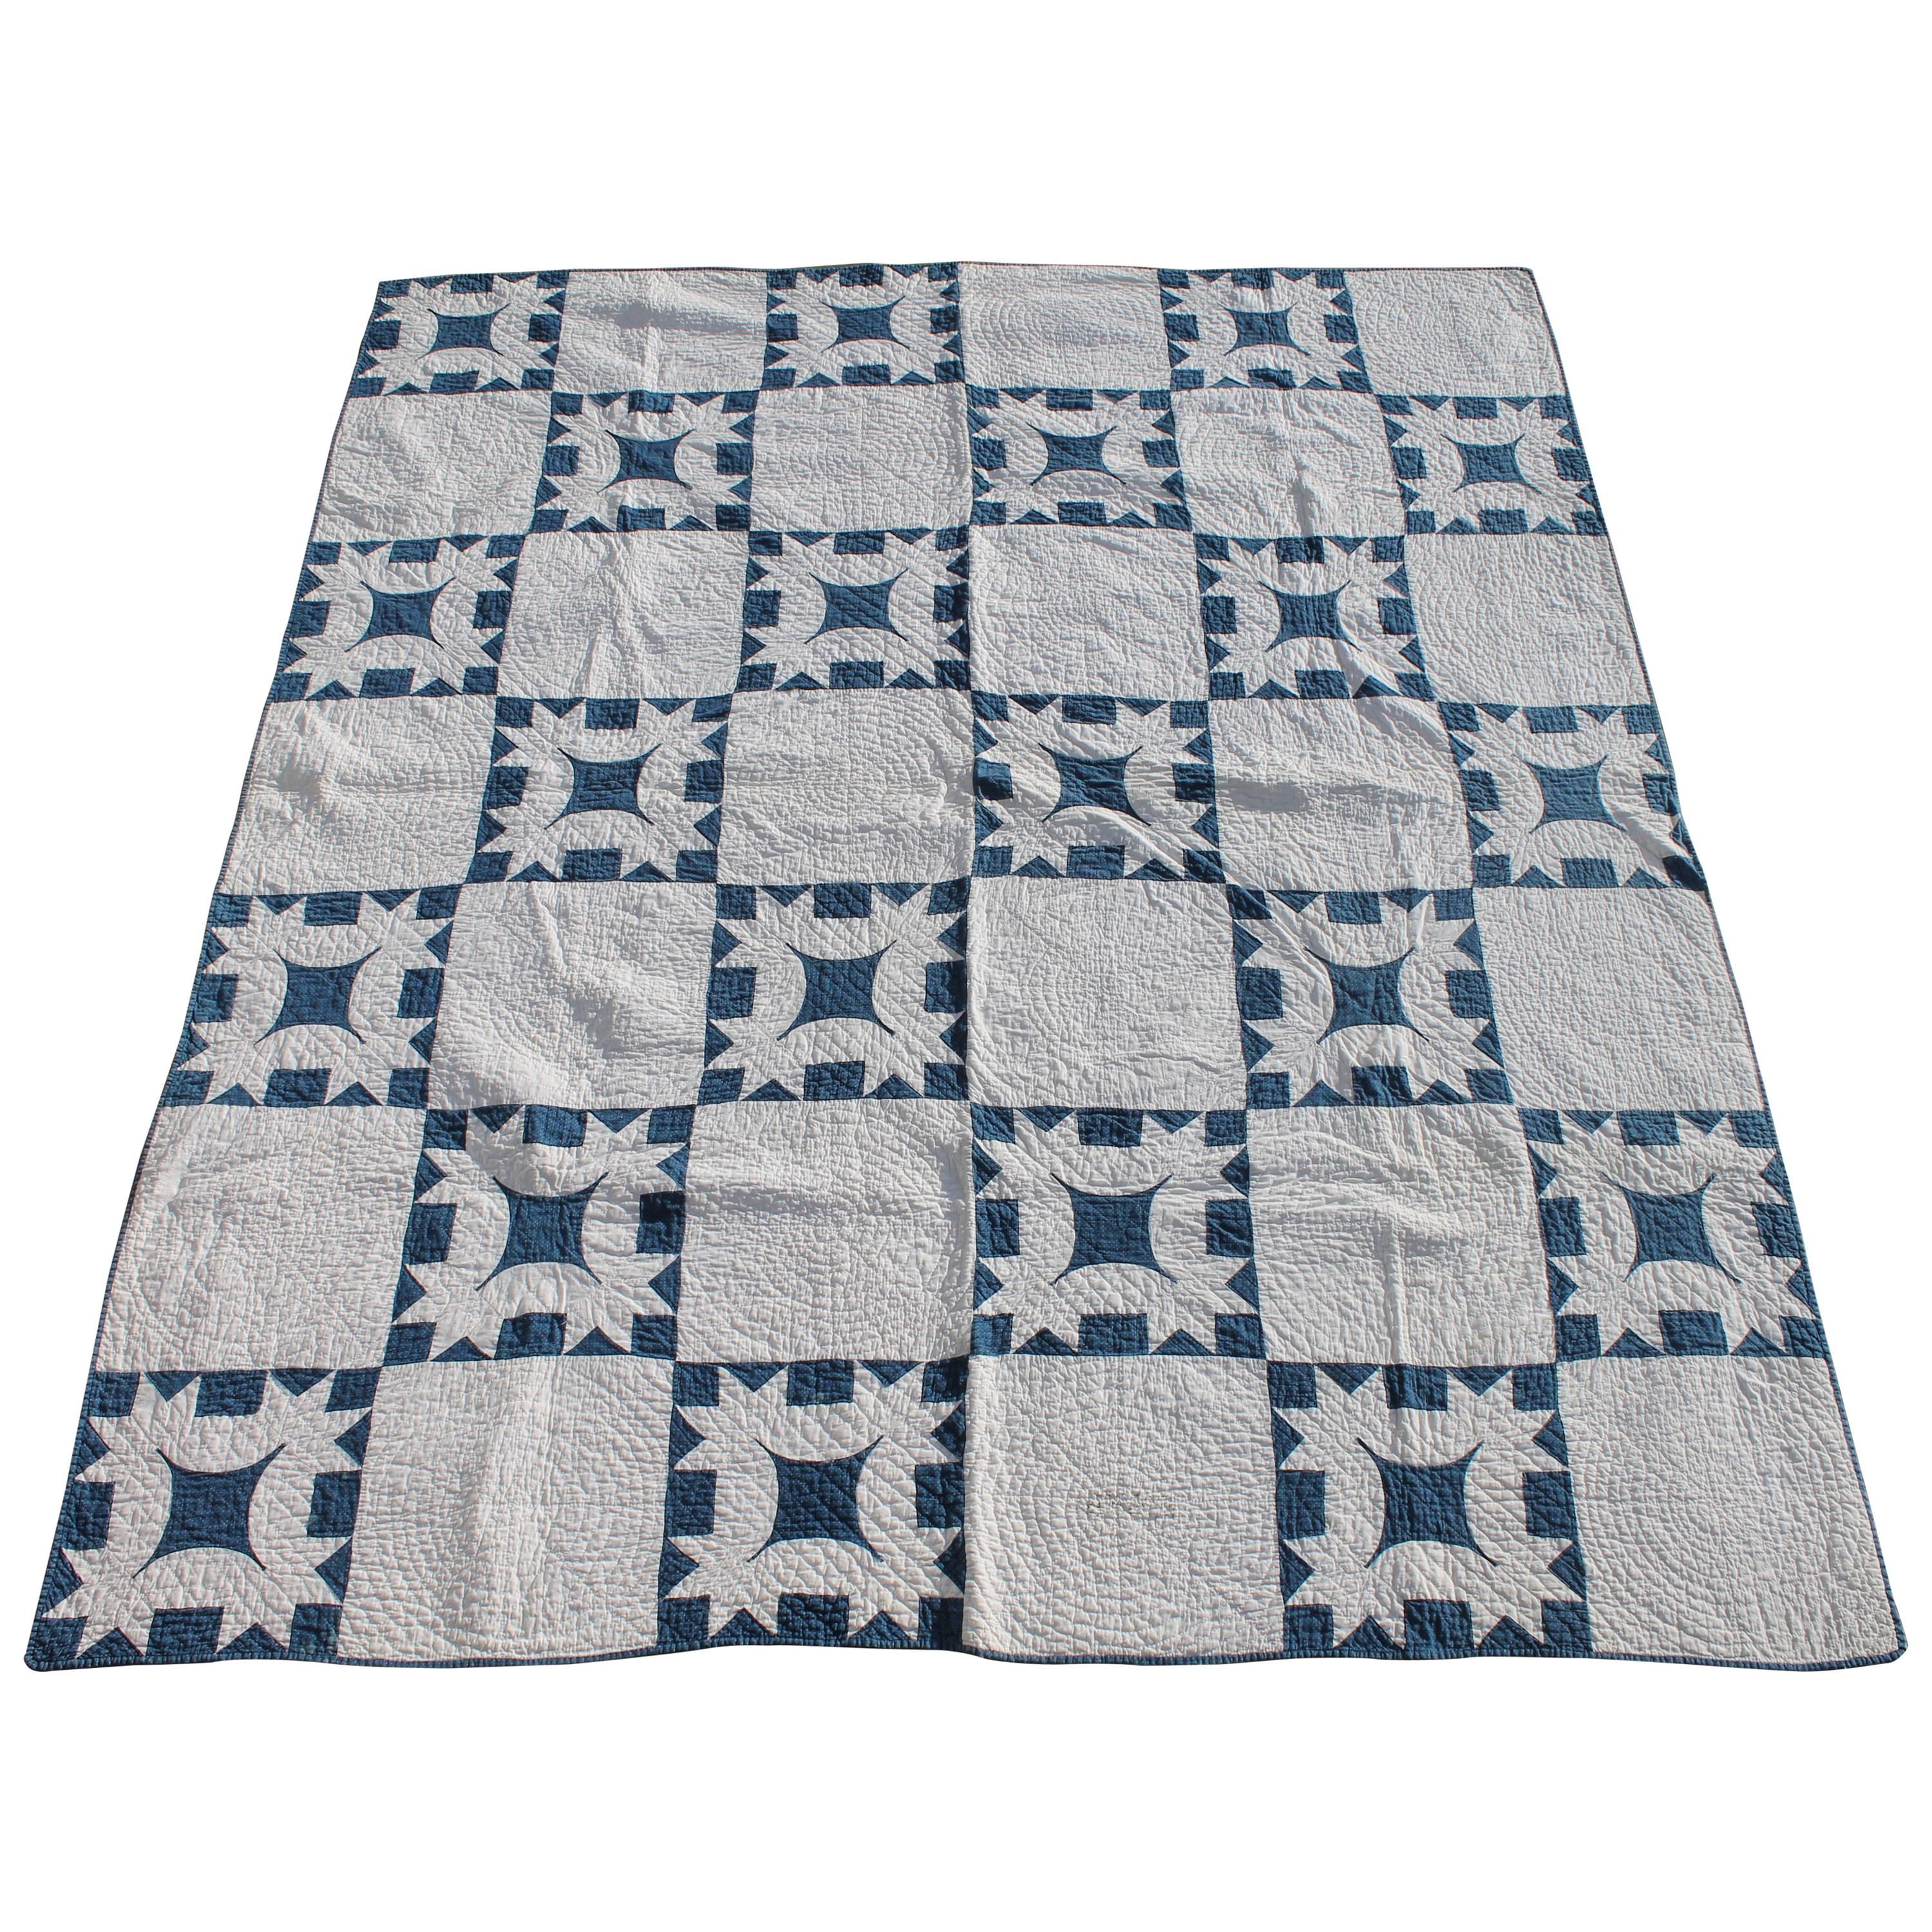 19th Century Quilt Blue and White Geometric